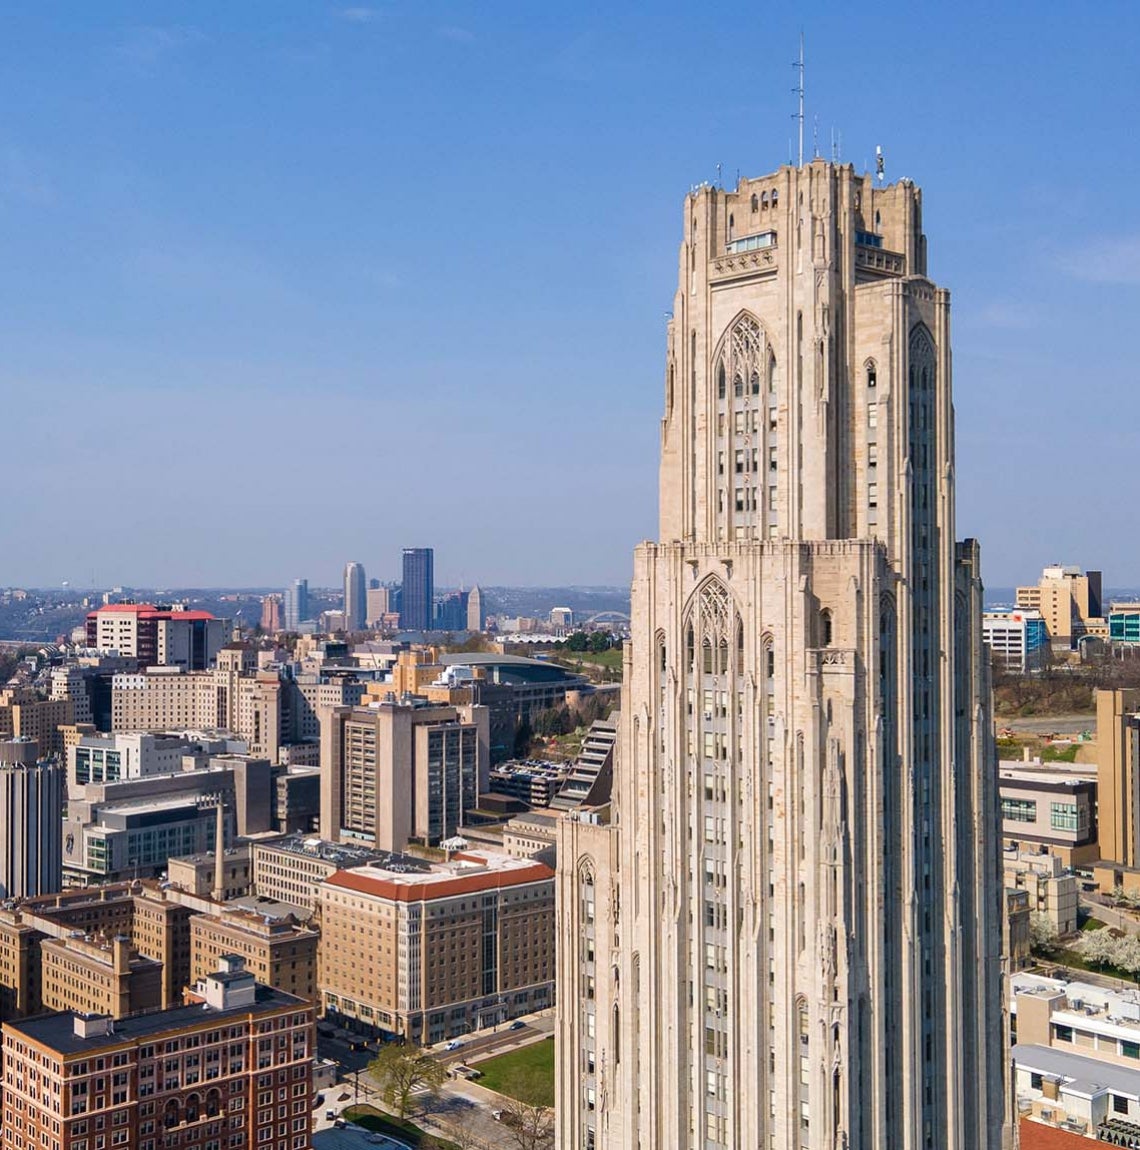 Drone-shot image of the Cathedral of Learning with Oakland and Downtown Pittsburgh in background